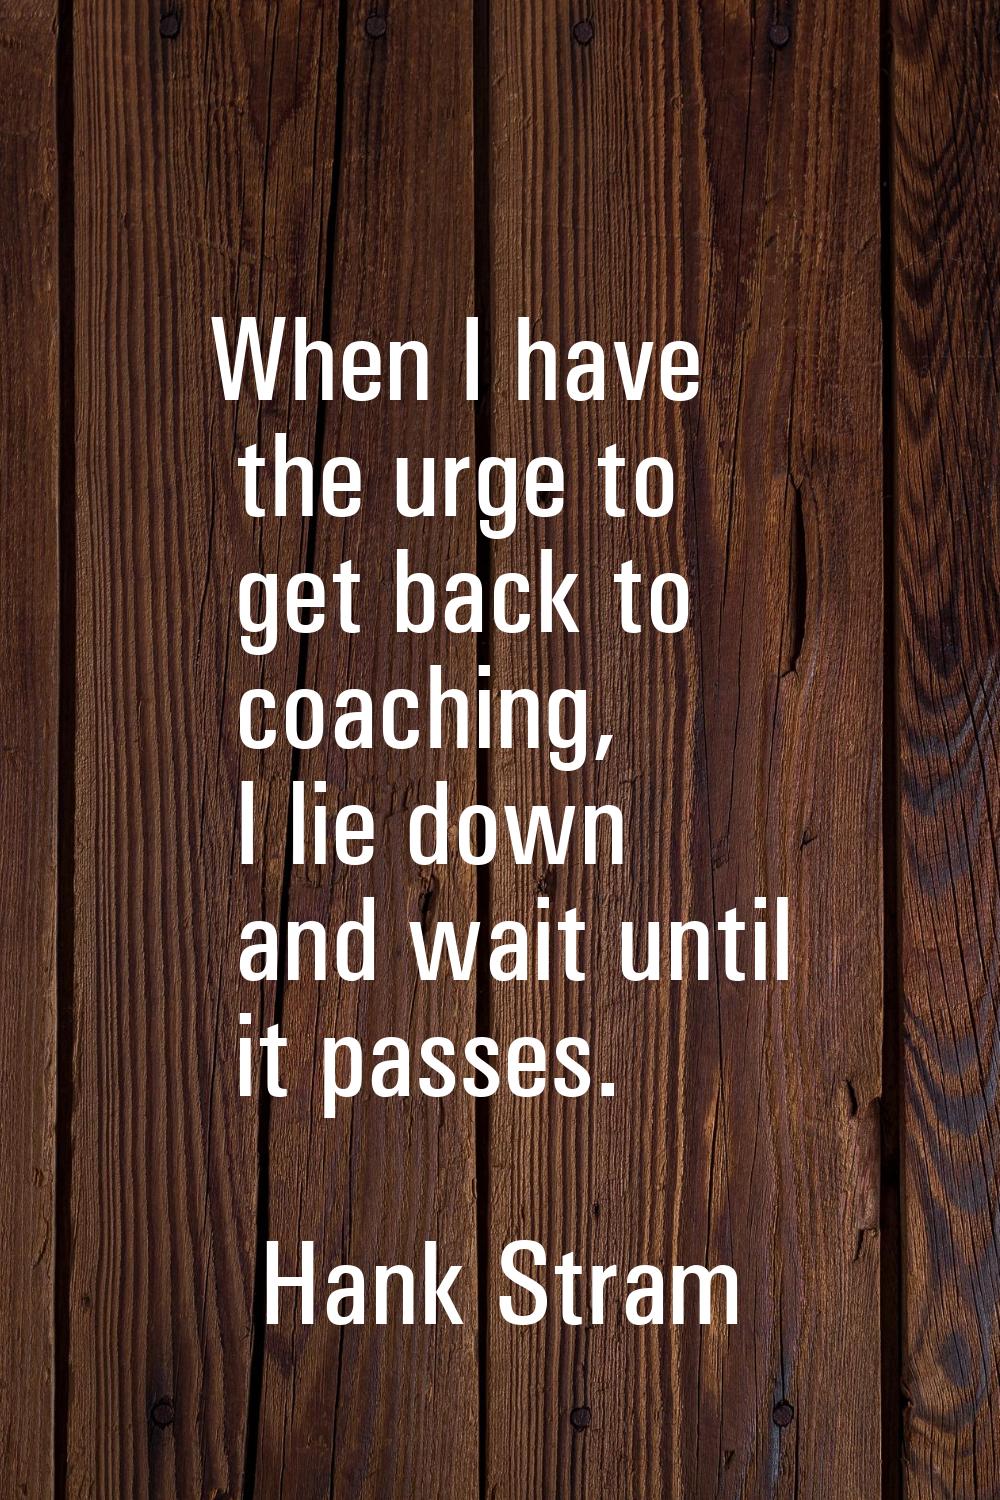 When I have the urge to get back to coaching, I lie down and wait until it passes.